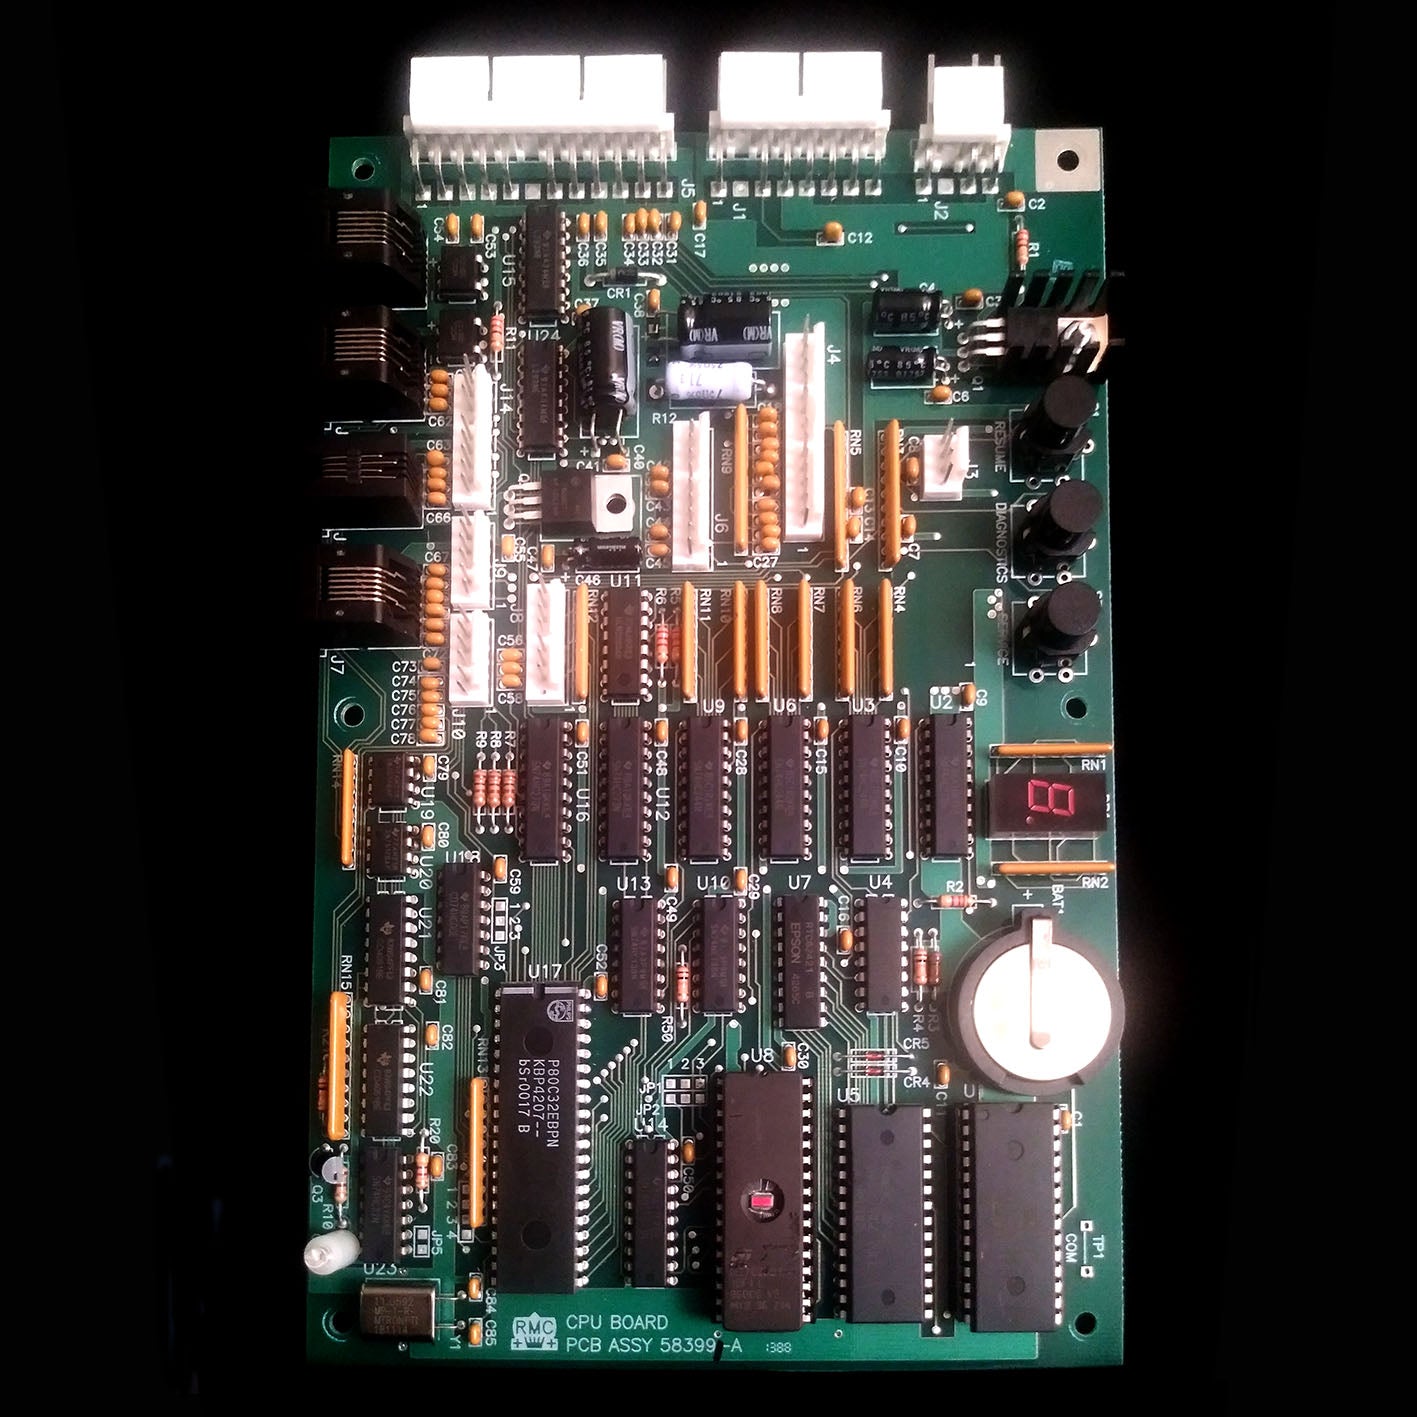 Rock-Ola Jukebox PCB Assembly Board - please see options